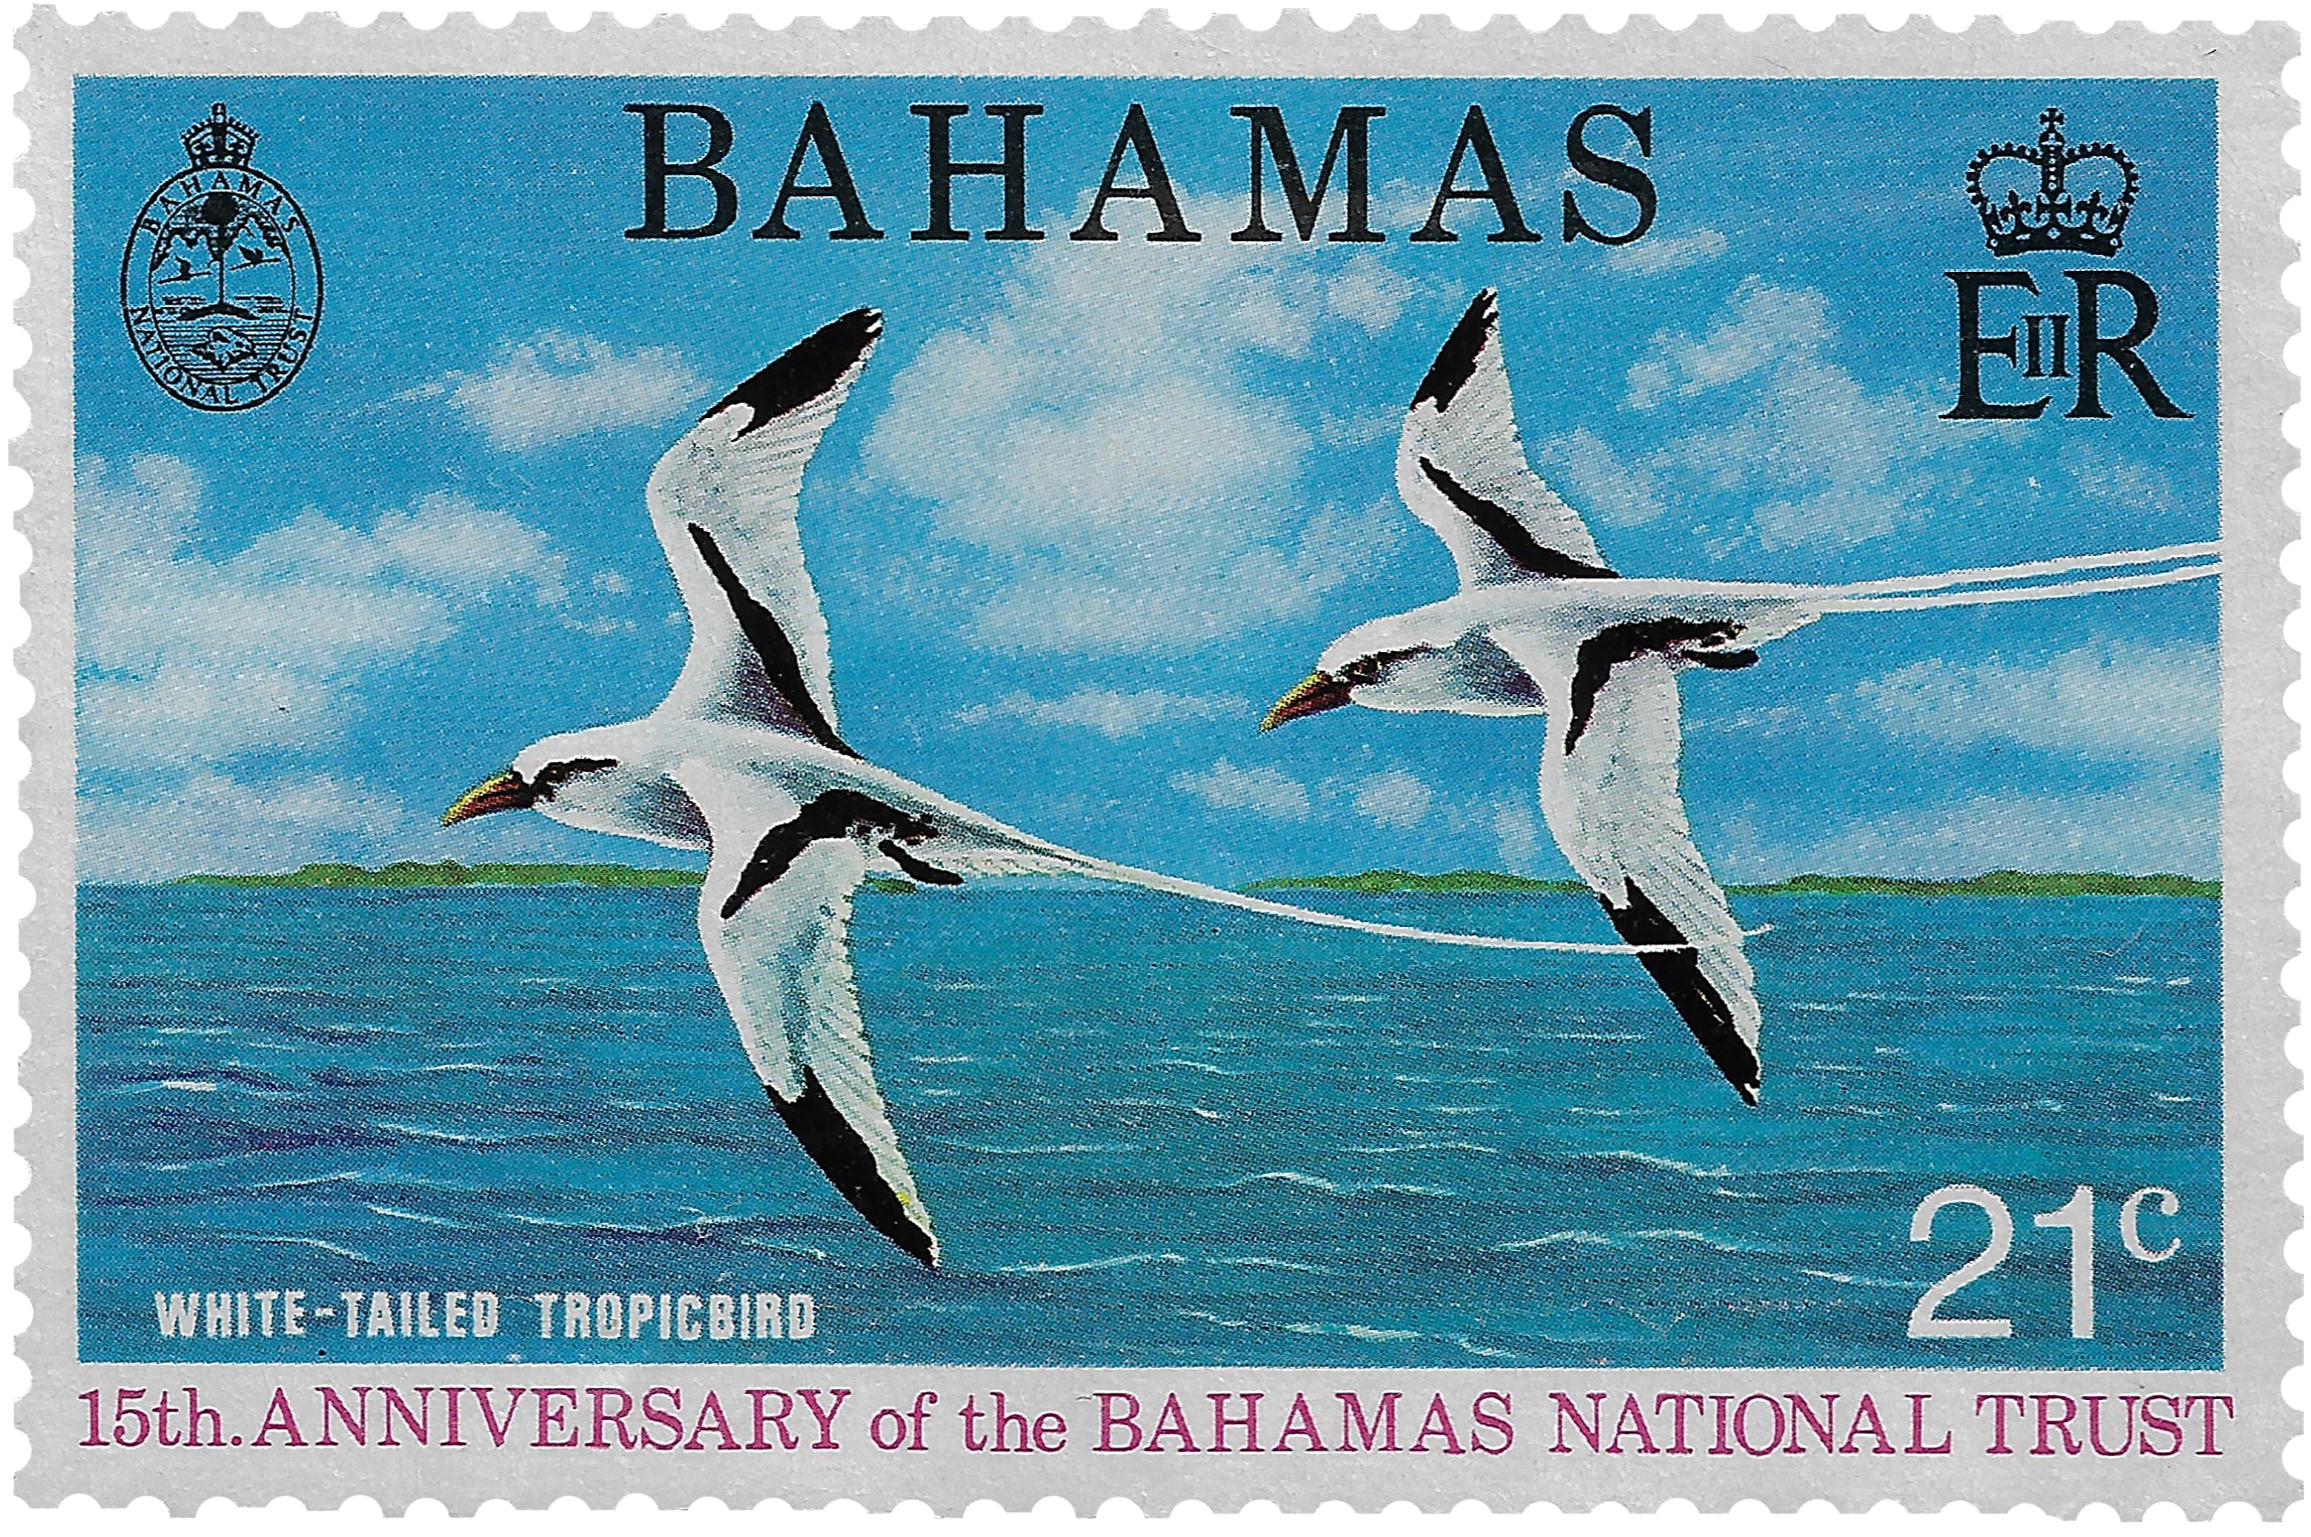 21c 1974, White-Tailed Tropicbird, 15th Anniversary of the Bahamas National Trust